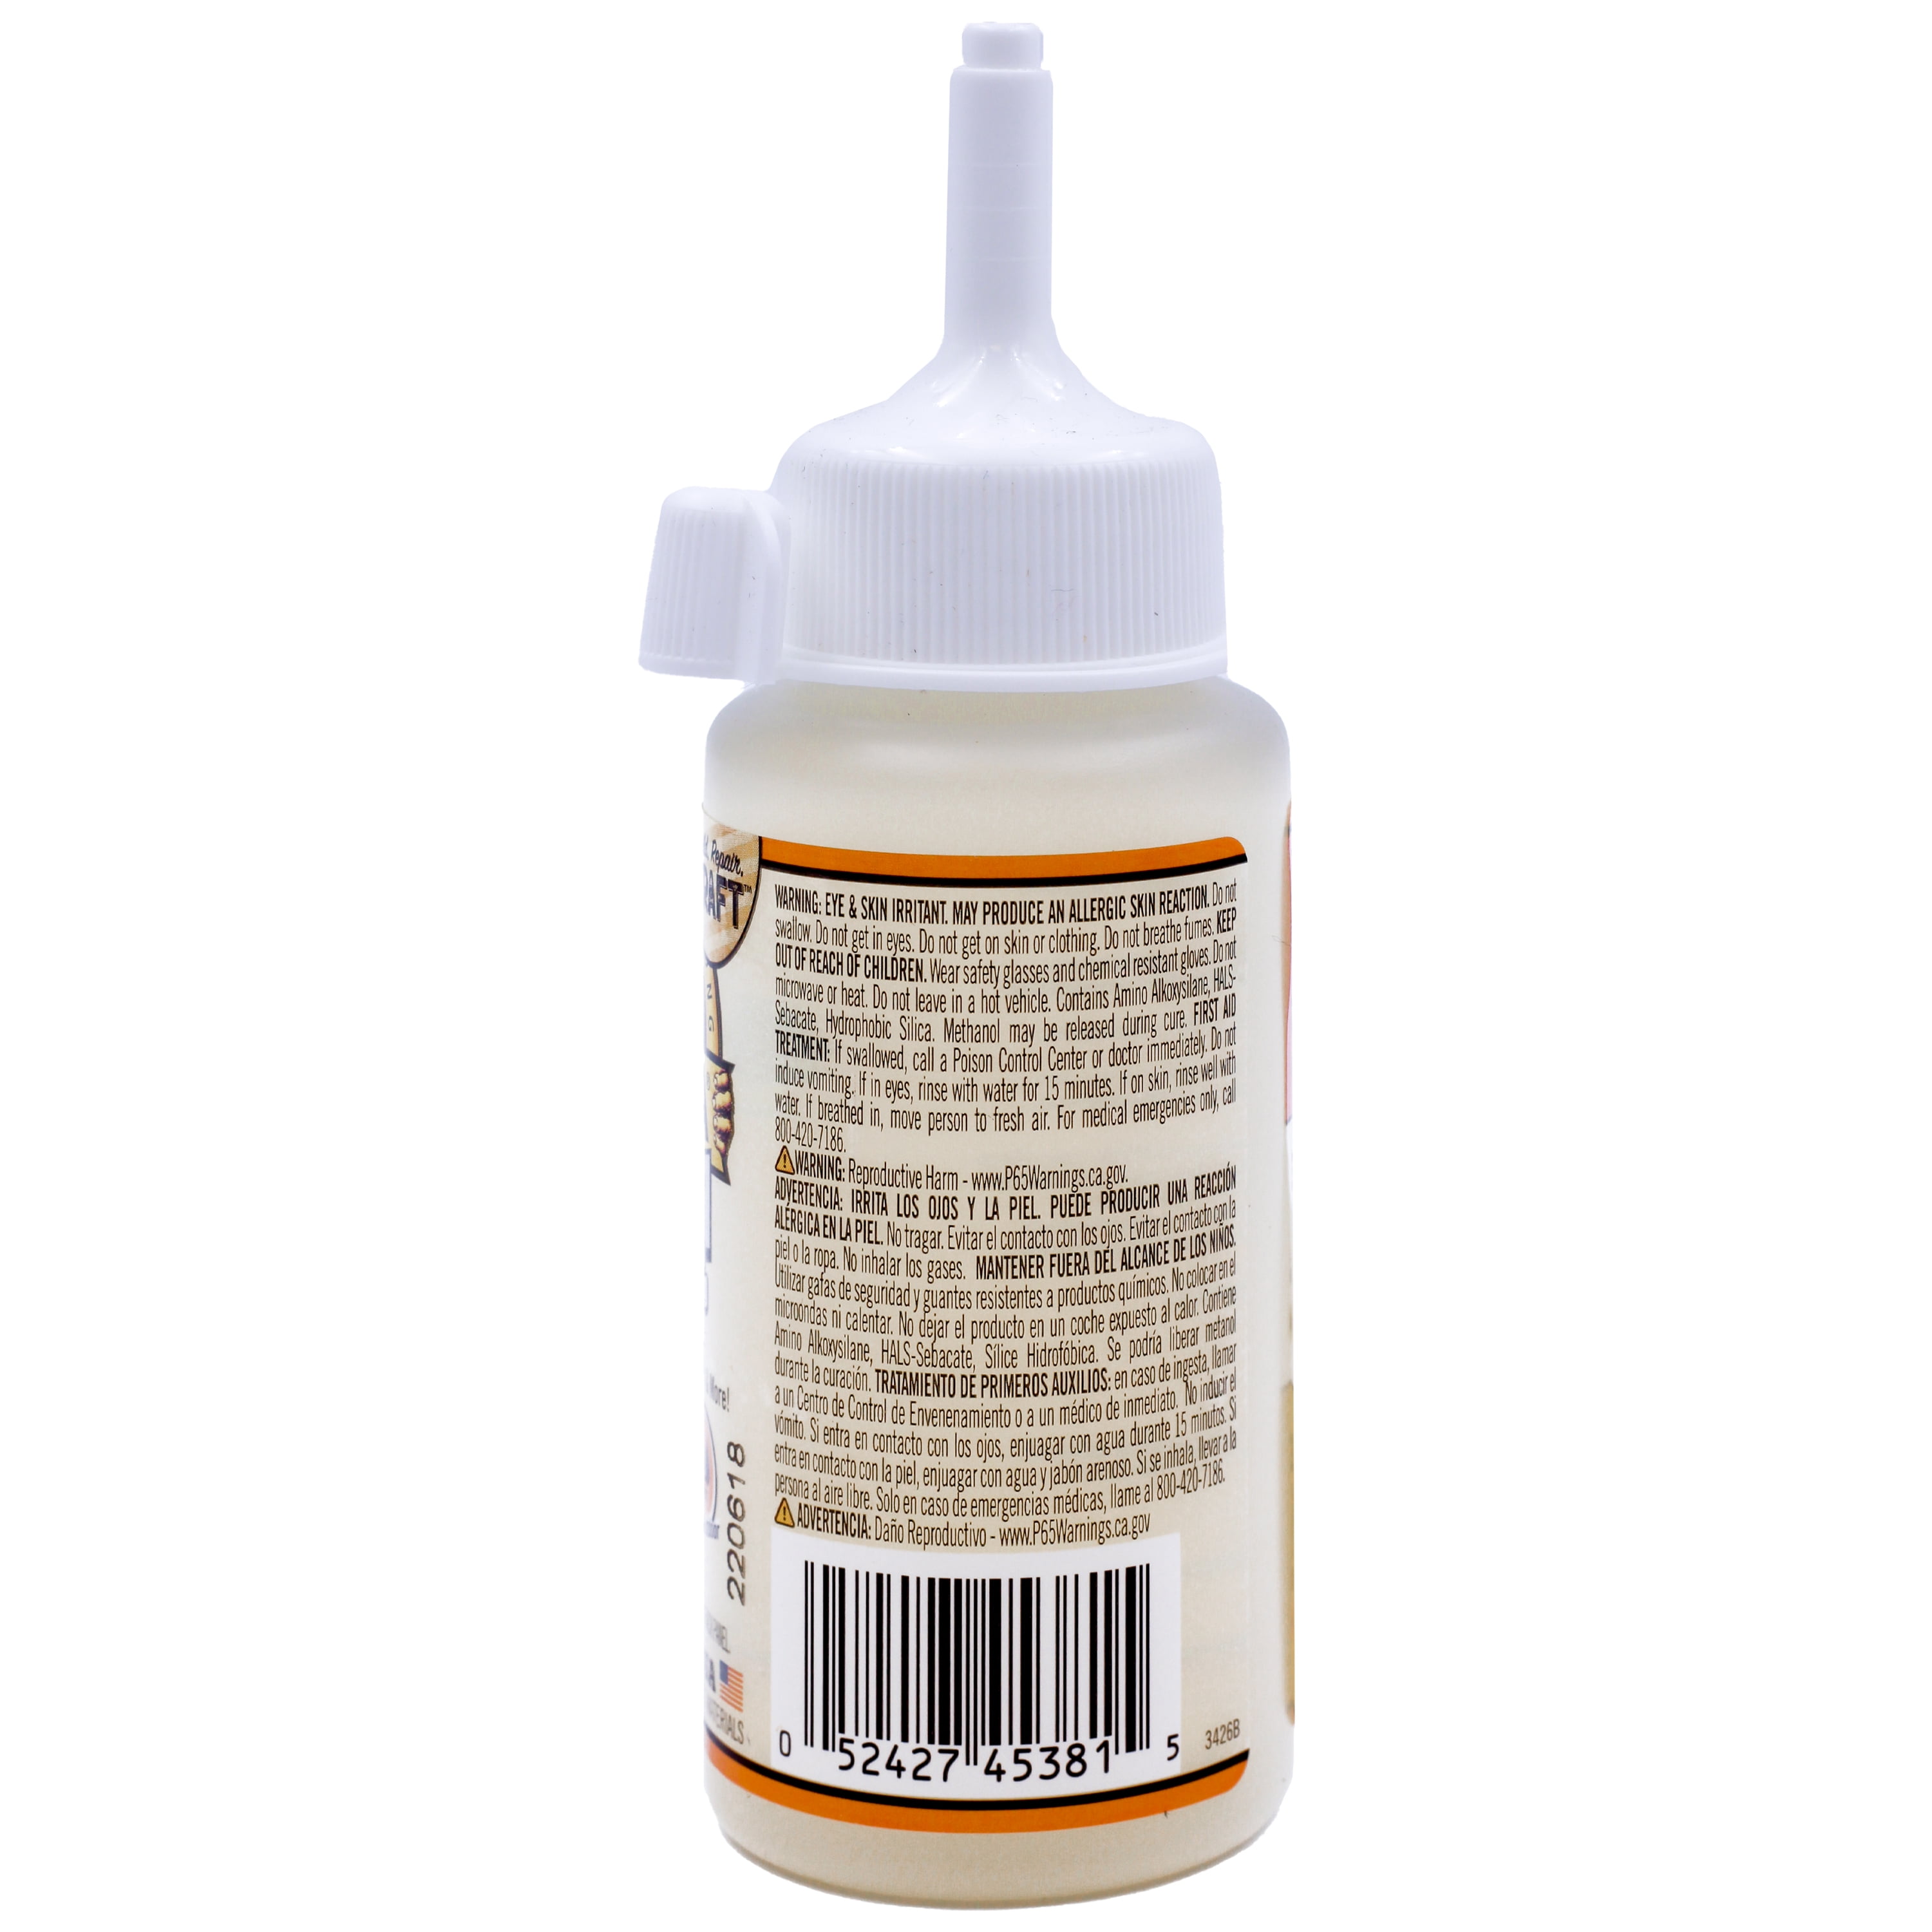 Adhesive, GORILLA™ Glue, clear. Sold per 1.75-fluid ounce bottle